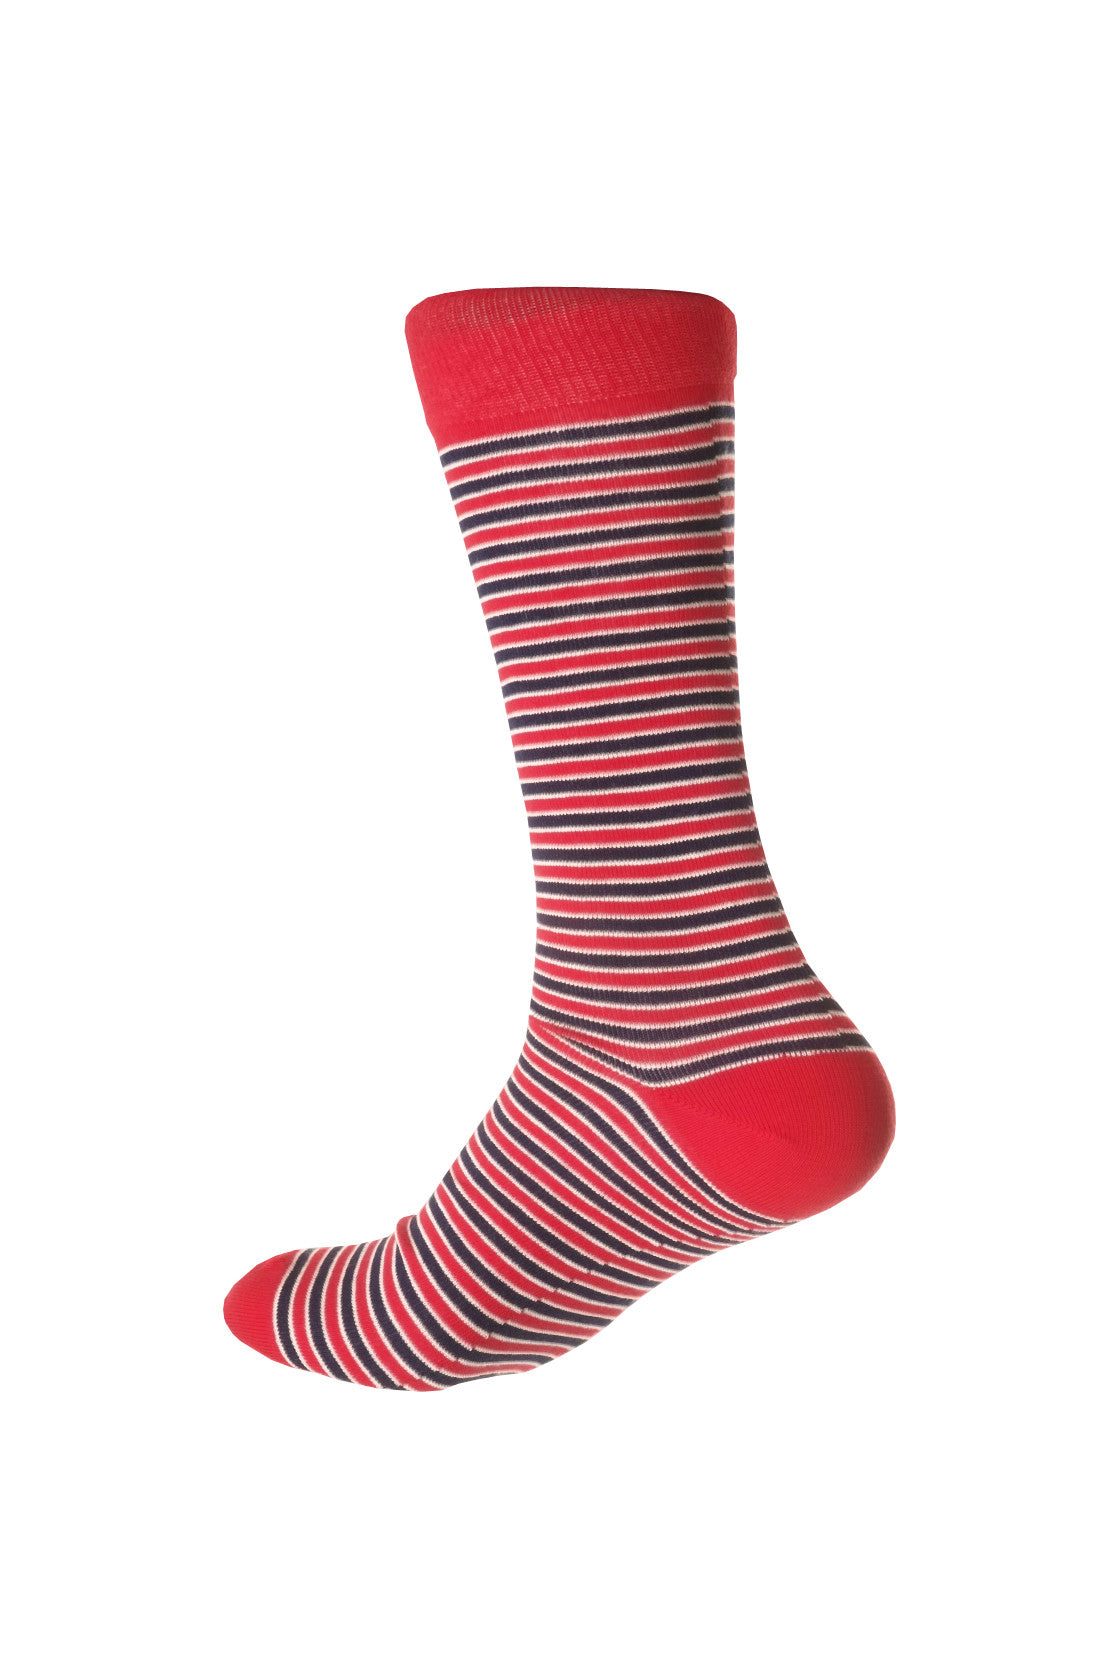 Giraffe Cool | Blue Red And White Stripes Brushed Cotton Socks Foot Back